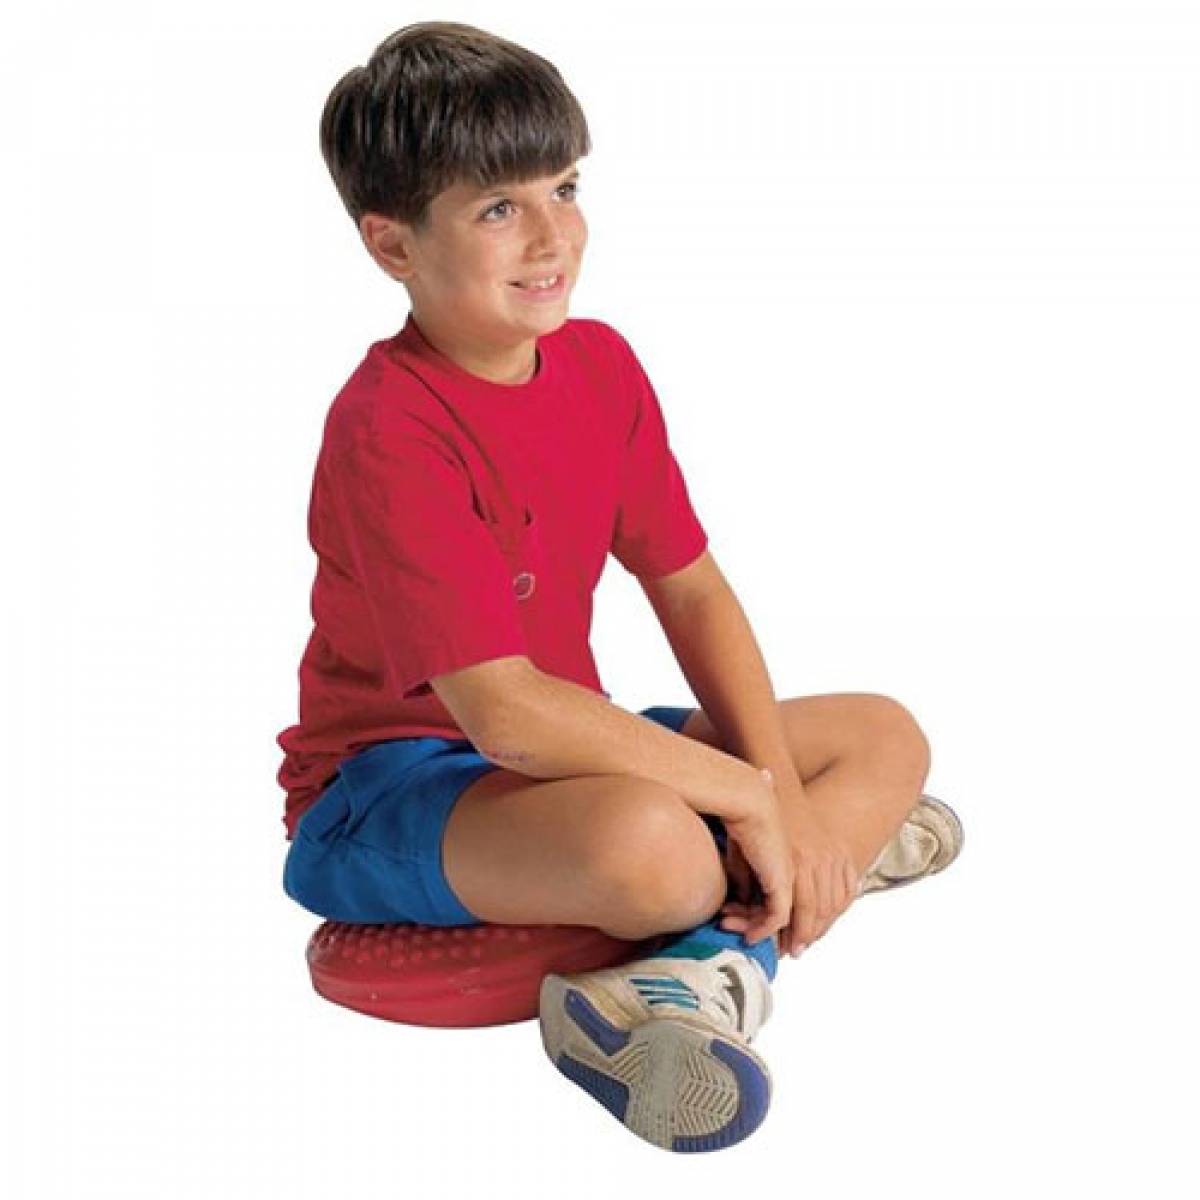 https://www.autism-products.com/wp-content/uploads/Disc-O-Sit-Junior-Inflatable-Seating-and-Balance-Cushion-%E2%80%93-12-inch-1200x1200.jpg